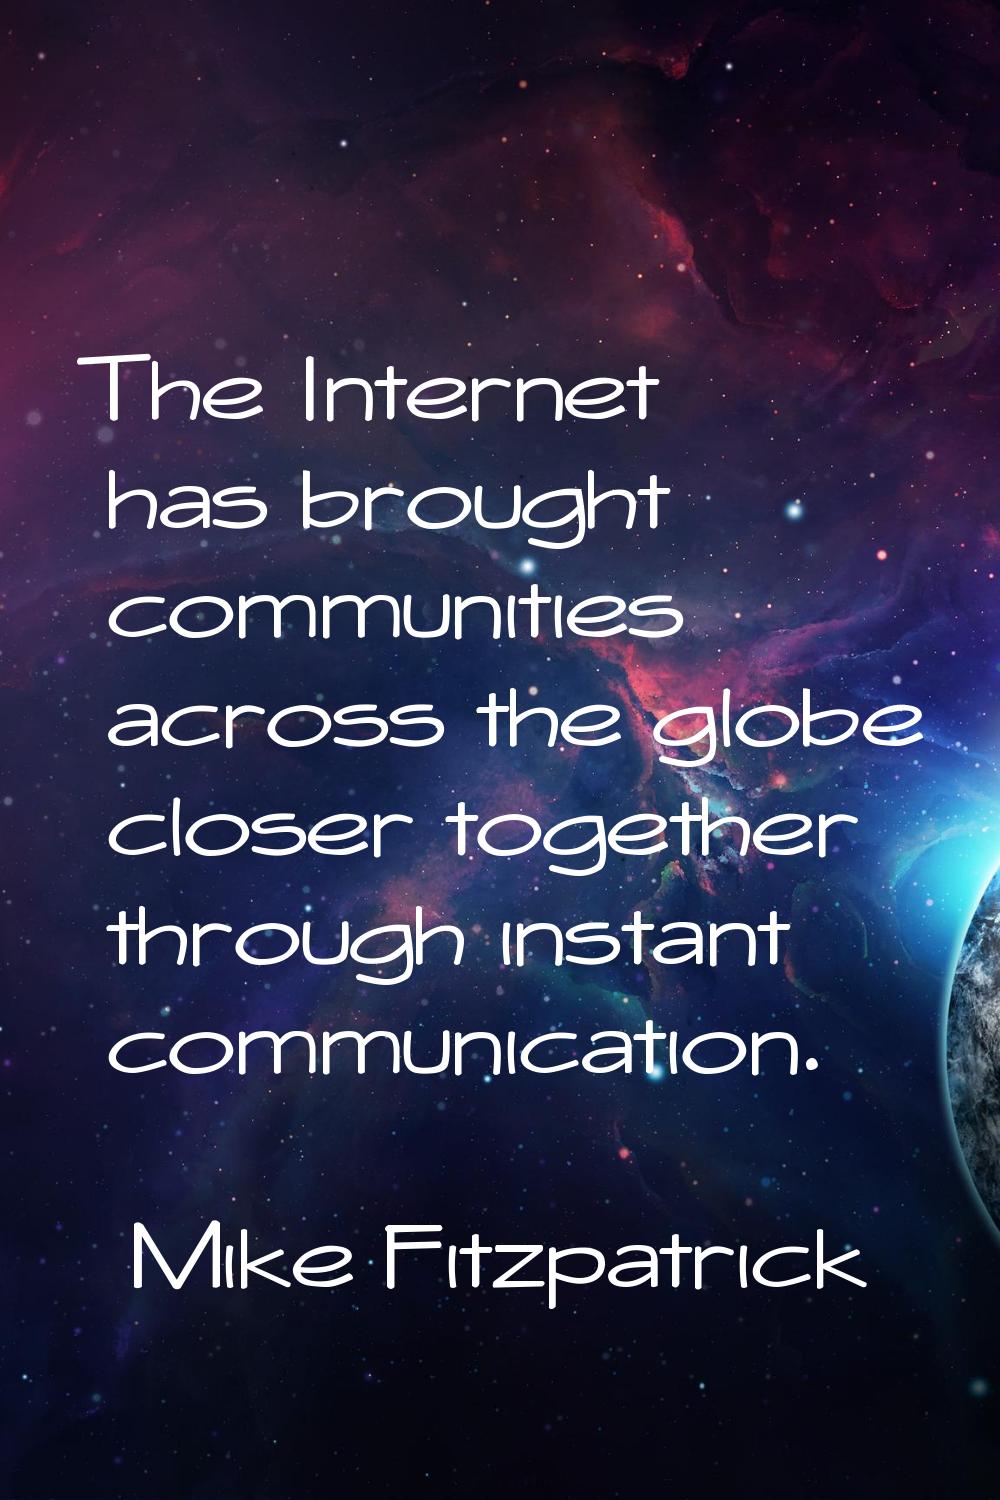 The Internet has brought communities across the globe closer together through instant communication